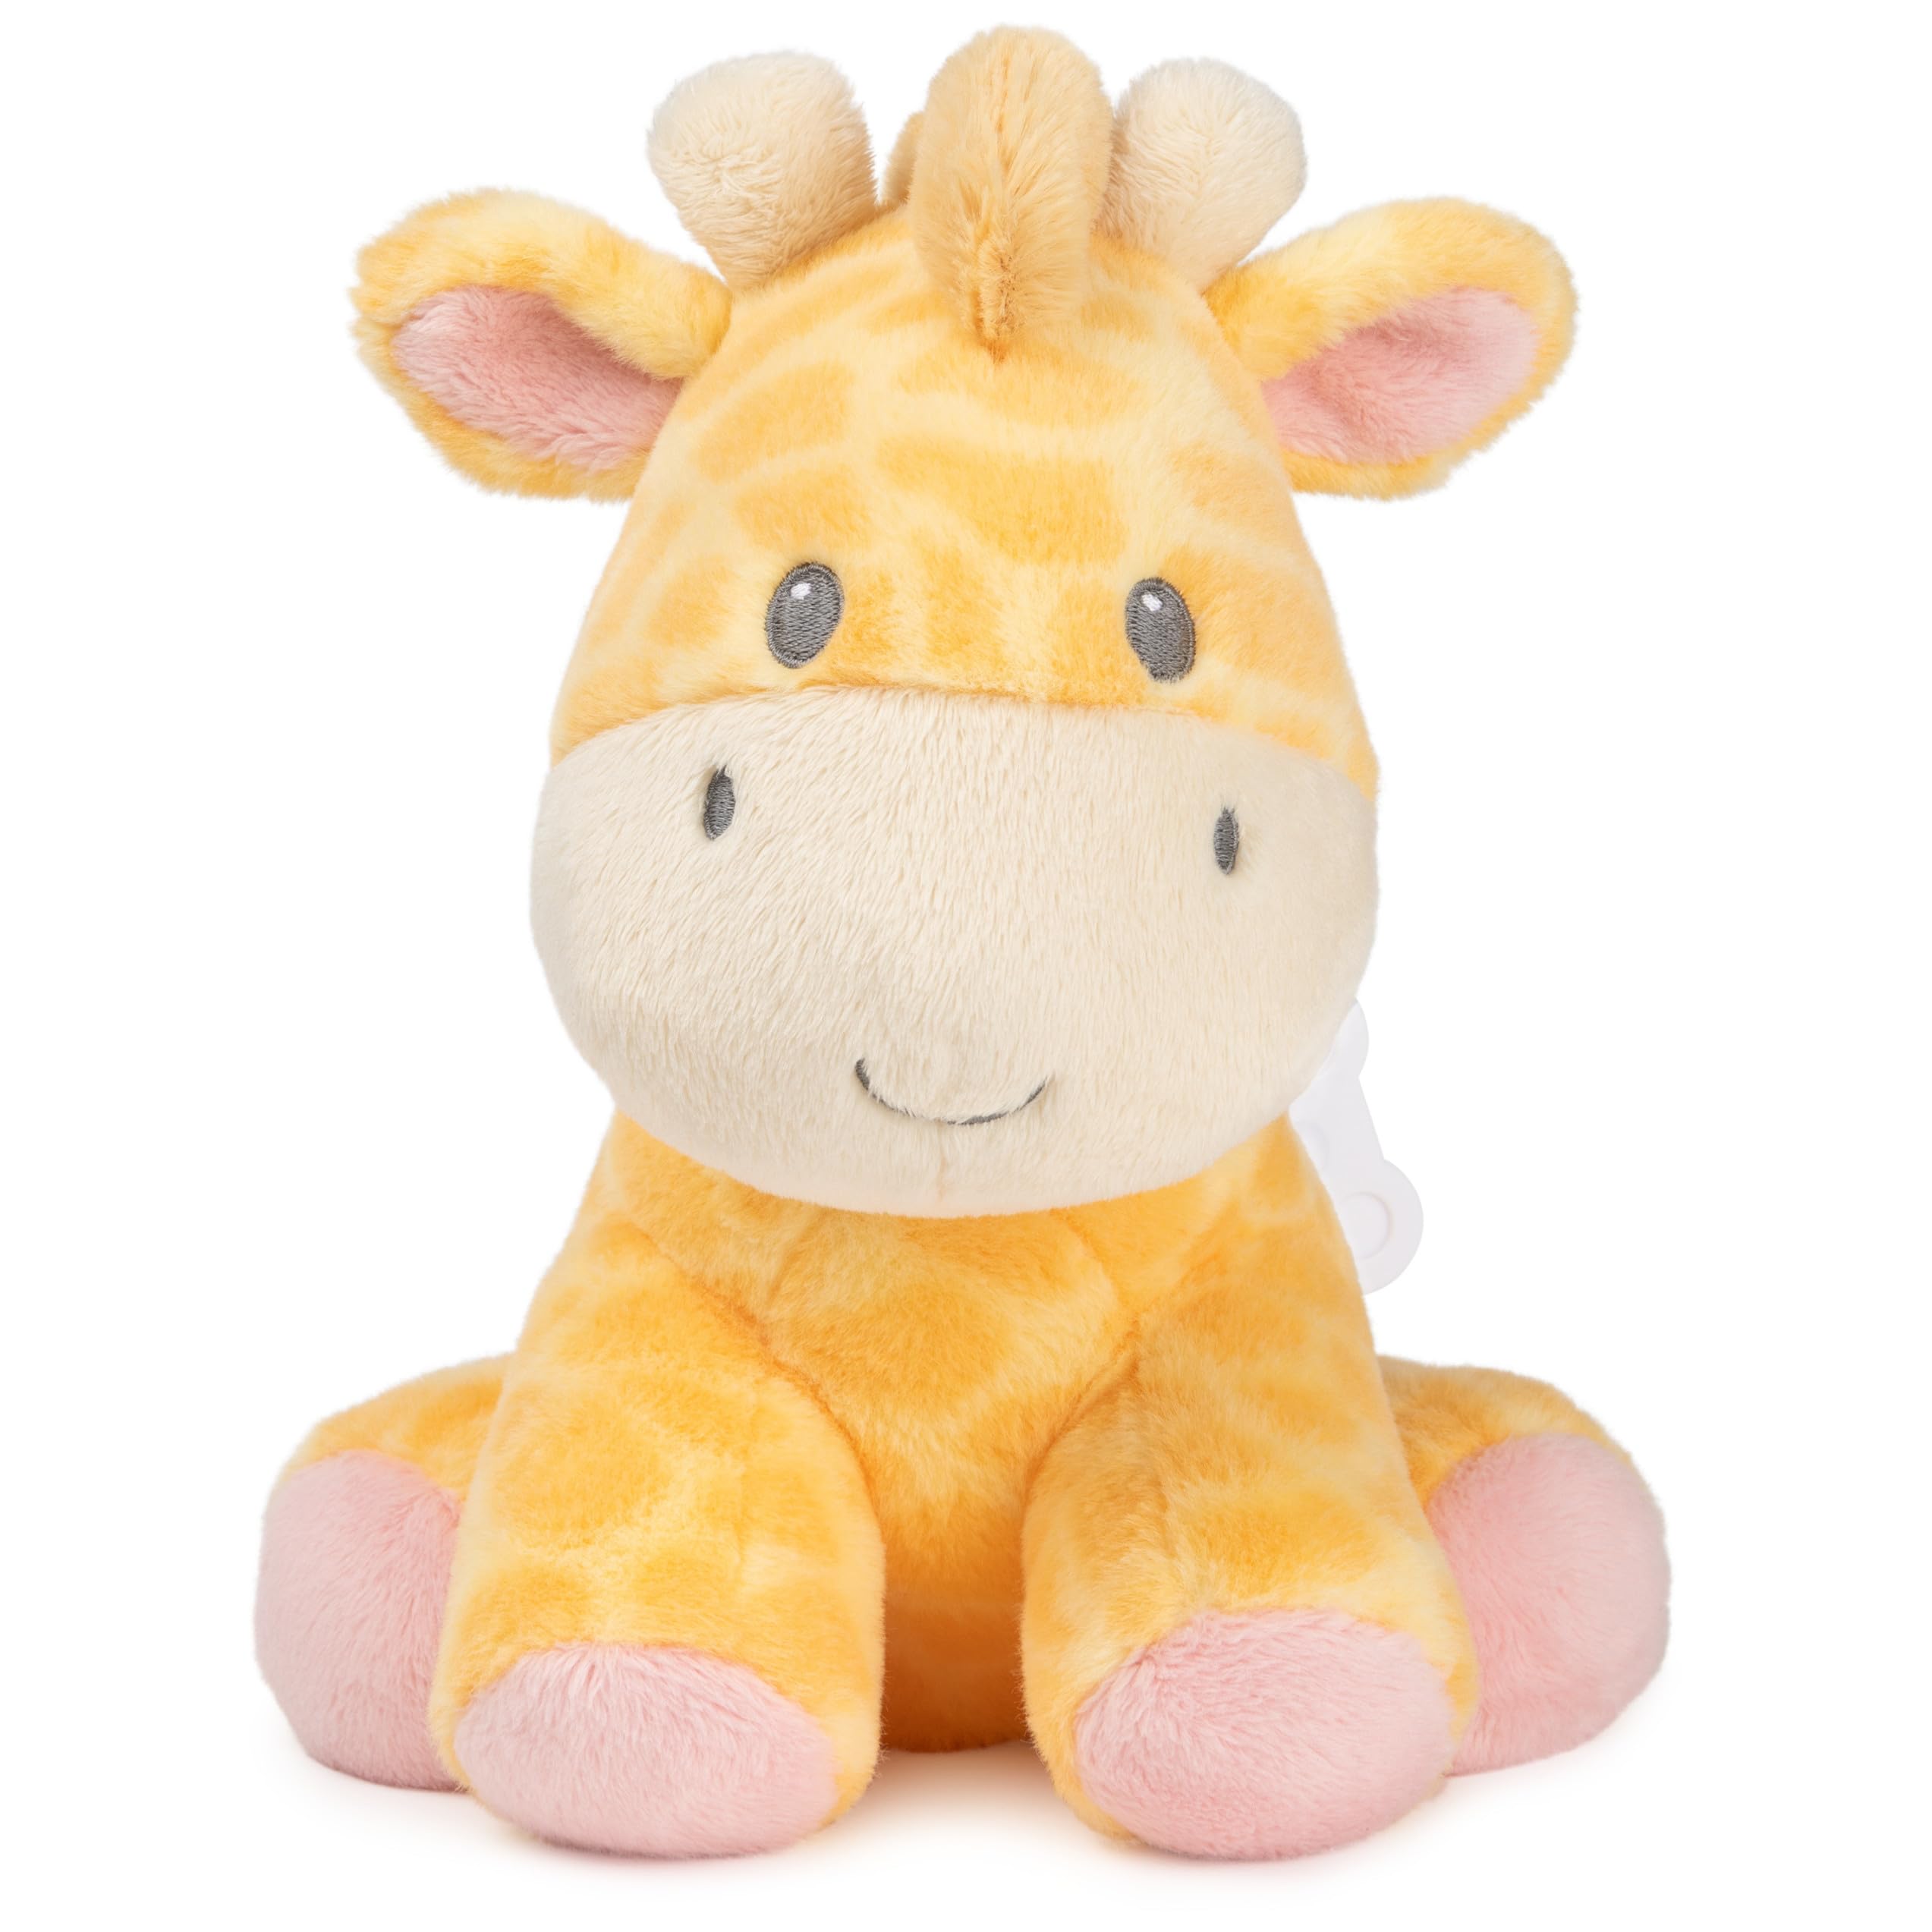 GUND Baby Safari Friends Giraffe Keywind Musical Plush, Plays Brahms’ Lullaby, Stuffed Animal Sensory Toy for Ages 10 Months and Up, Yellow, 9”